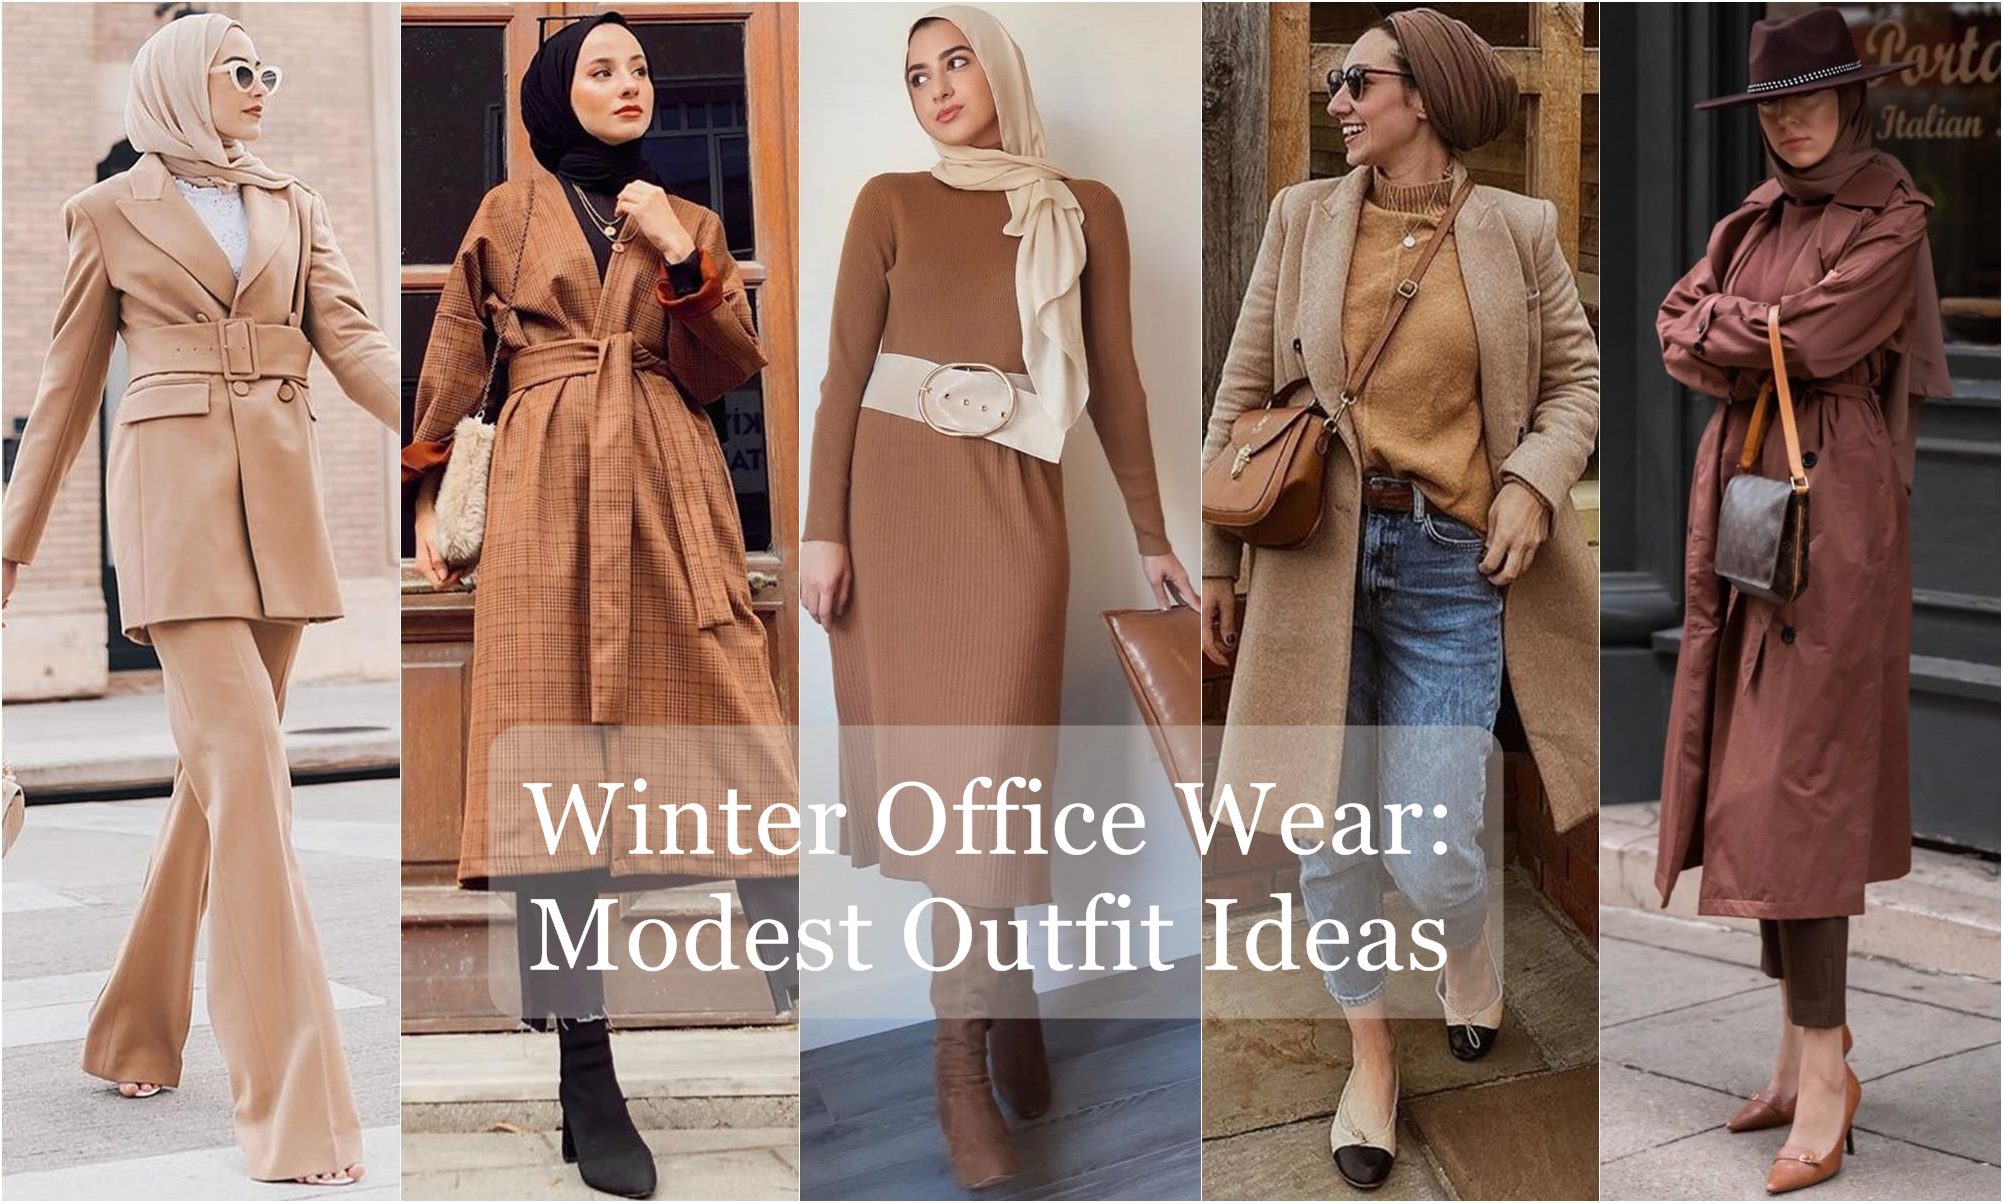 Winter Office Wear: Modest Outfit Ideas - Hijab Fashion Inspiration